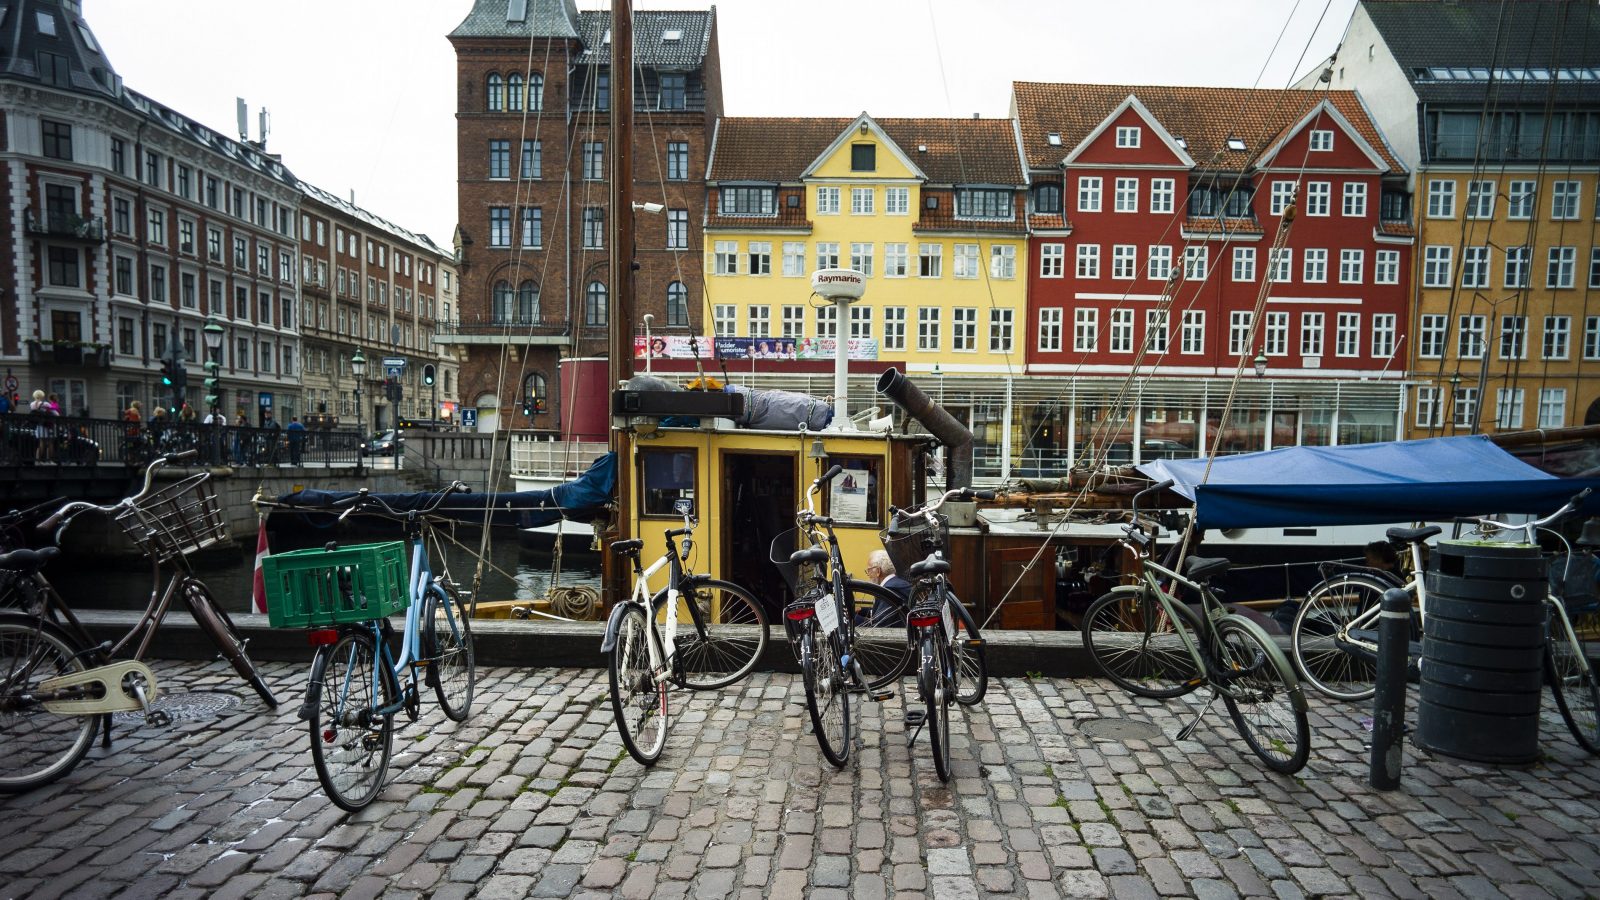 A photo shows a row of bicycles in front of a canal and colorful buildings.